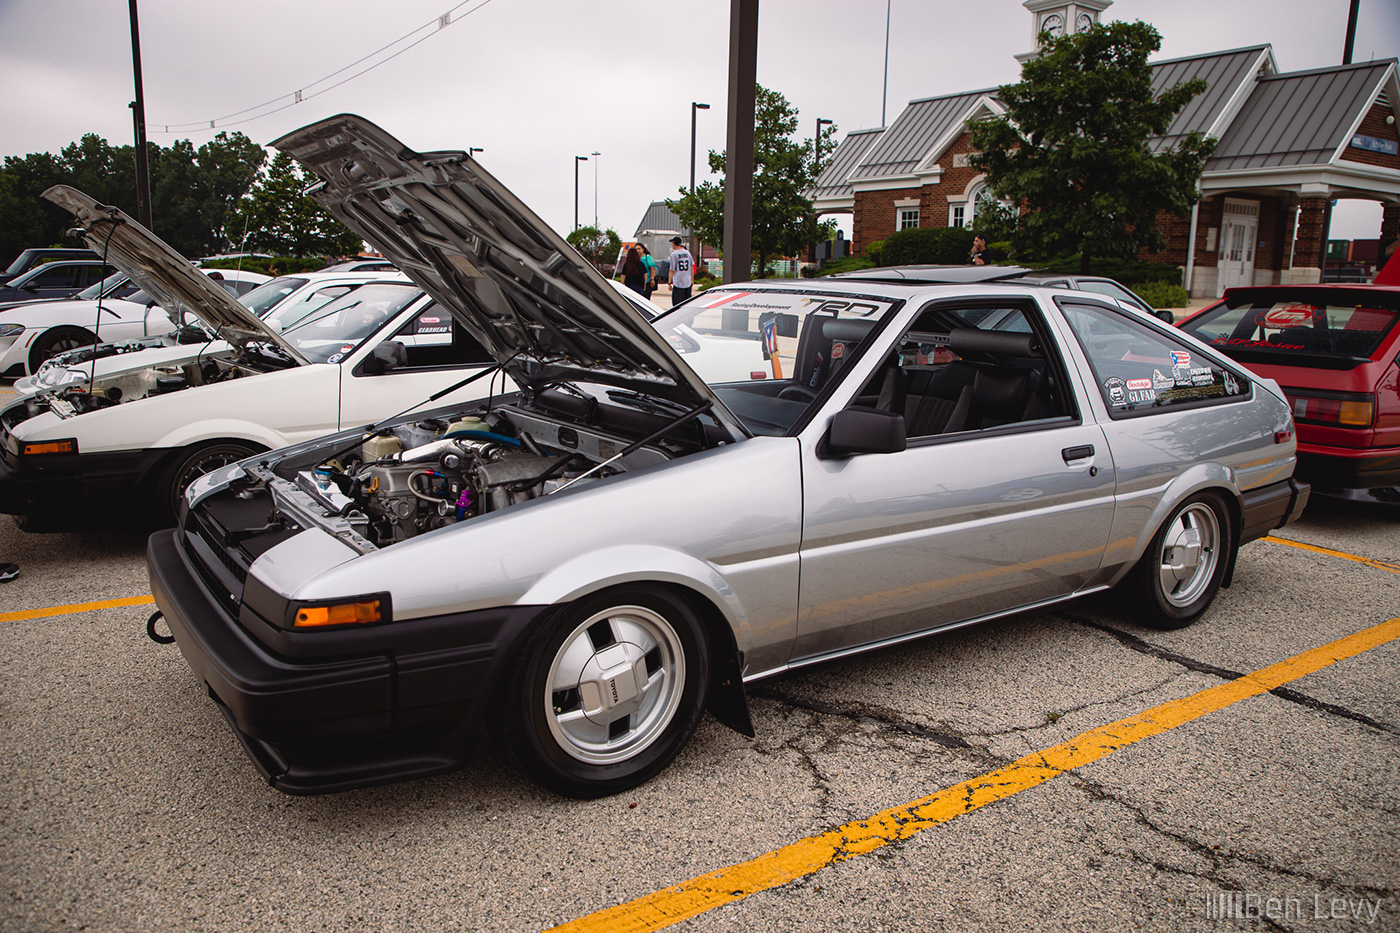 Silver AE86 Toyota Corolla at a Chicago Vintage Japanese Car Meet